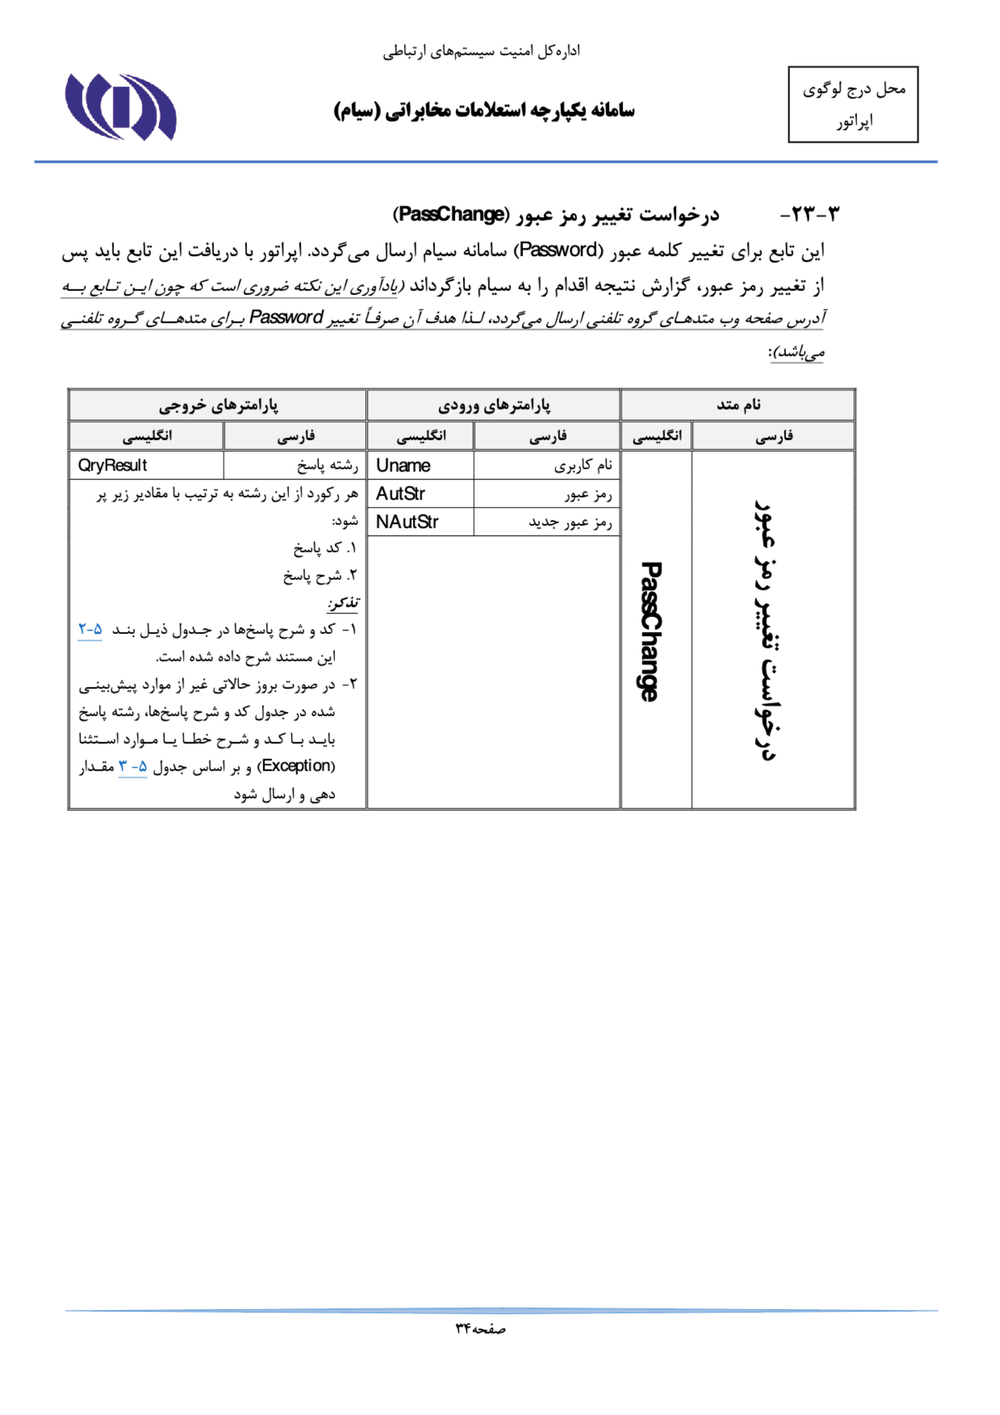 Page 34 from Iran’s SIAM Manual in Persian for Tracking and Controlling Mobile Phones